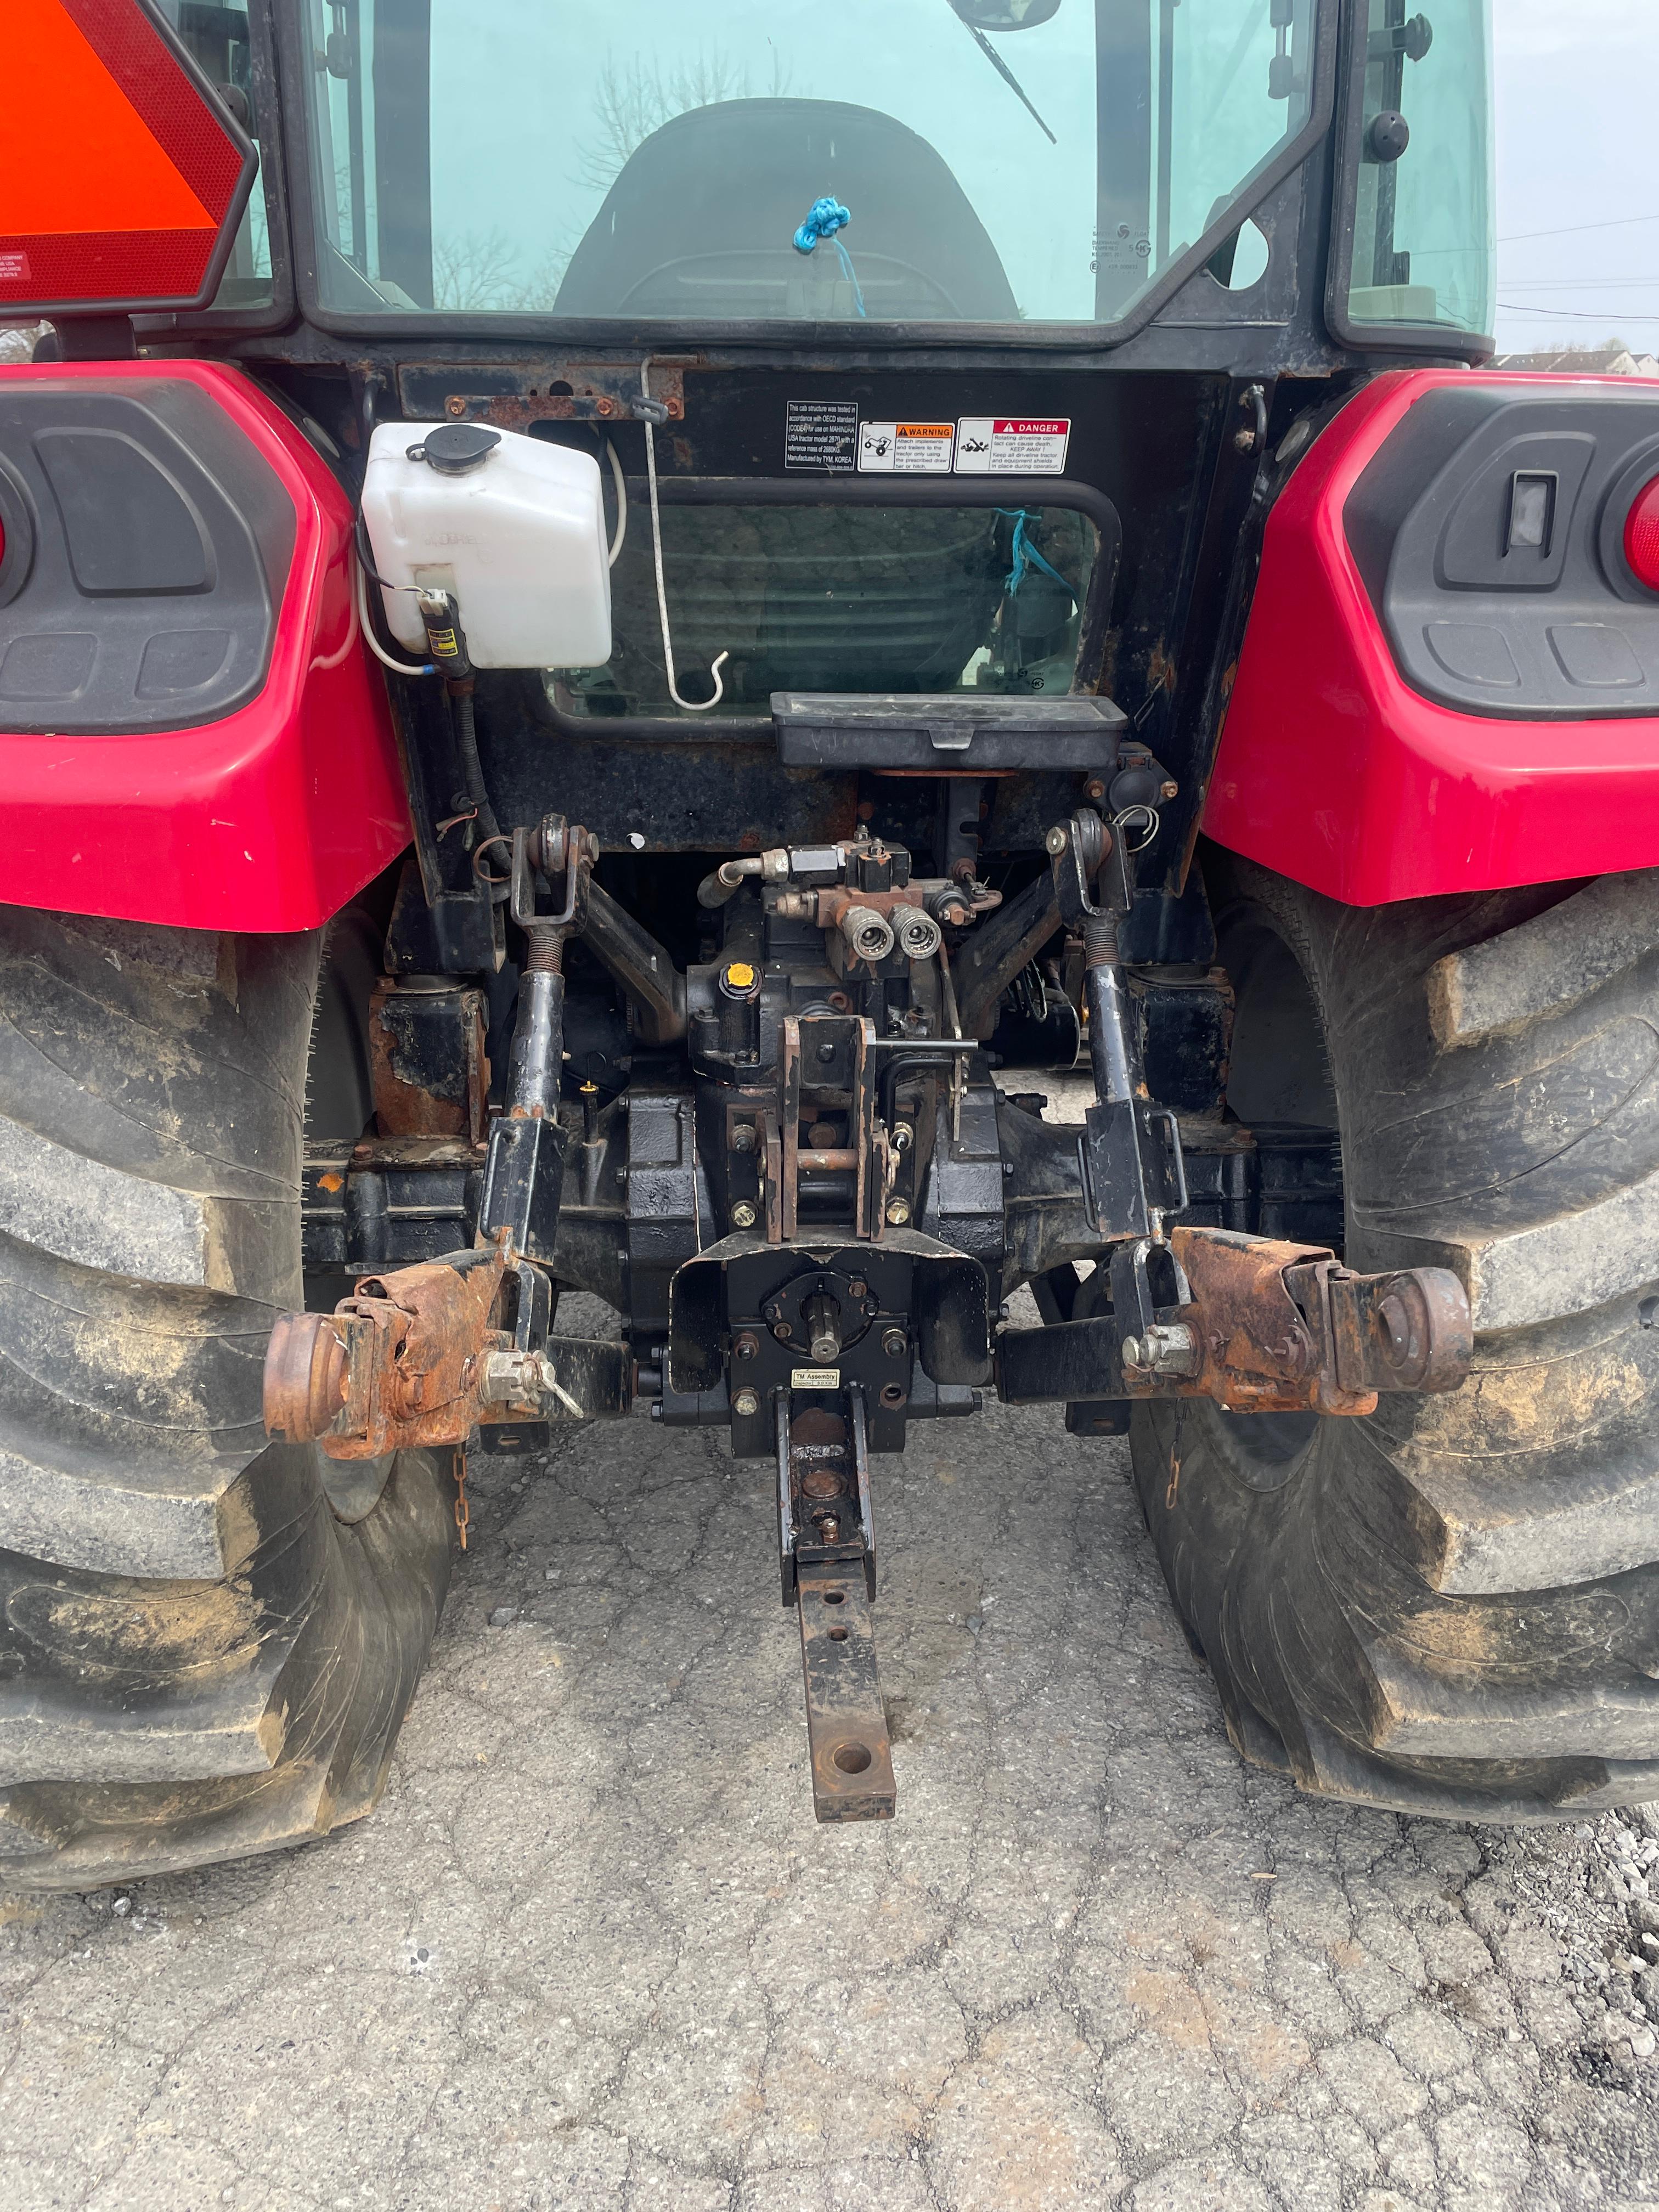 Mahindra 2670 4X4 Tractor W/ Front End Loader